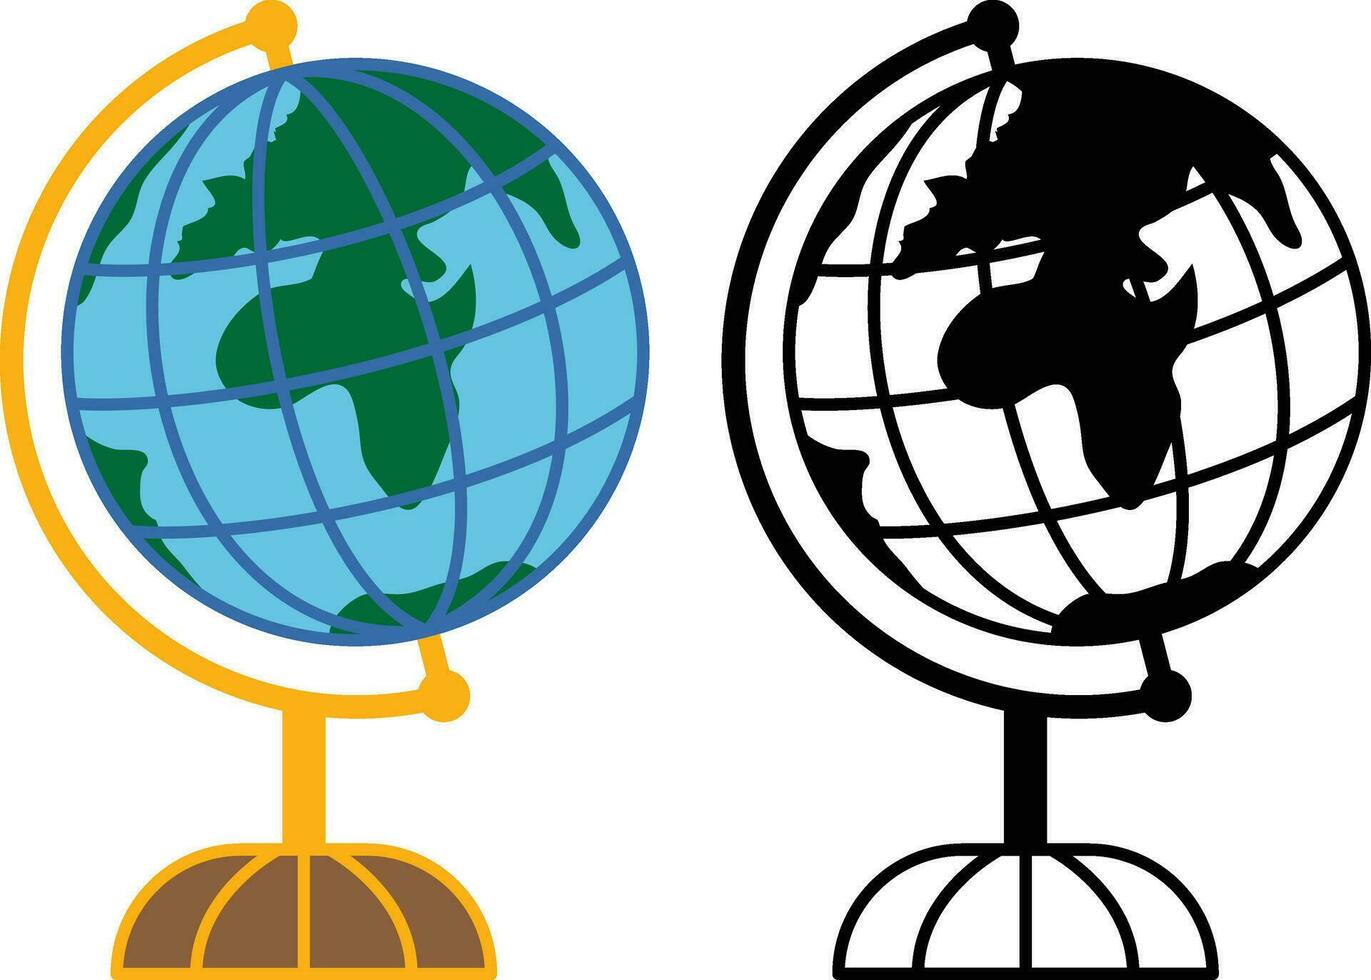 World Globe Map with Swivel Stand vector illustration ,  Educational and Decorative Globe , World globe model colored and black and white stock vector image